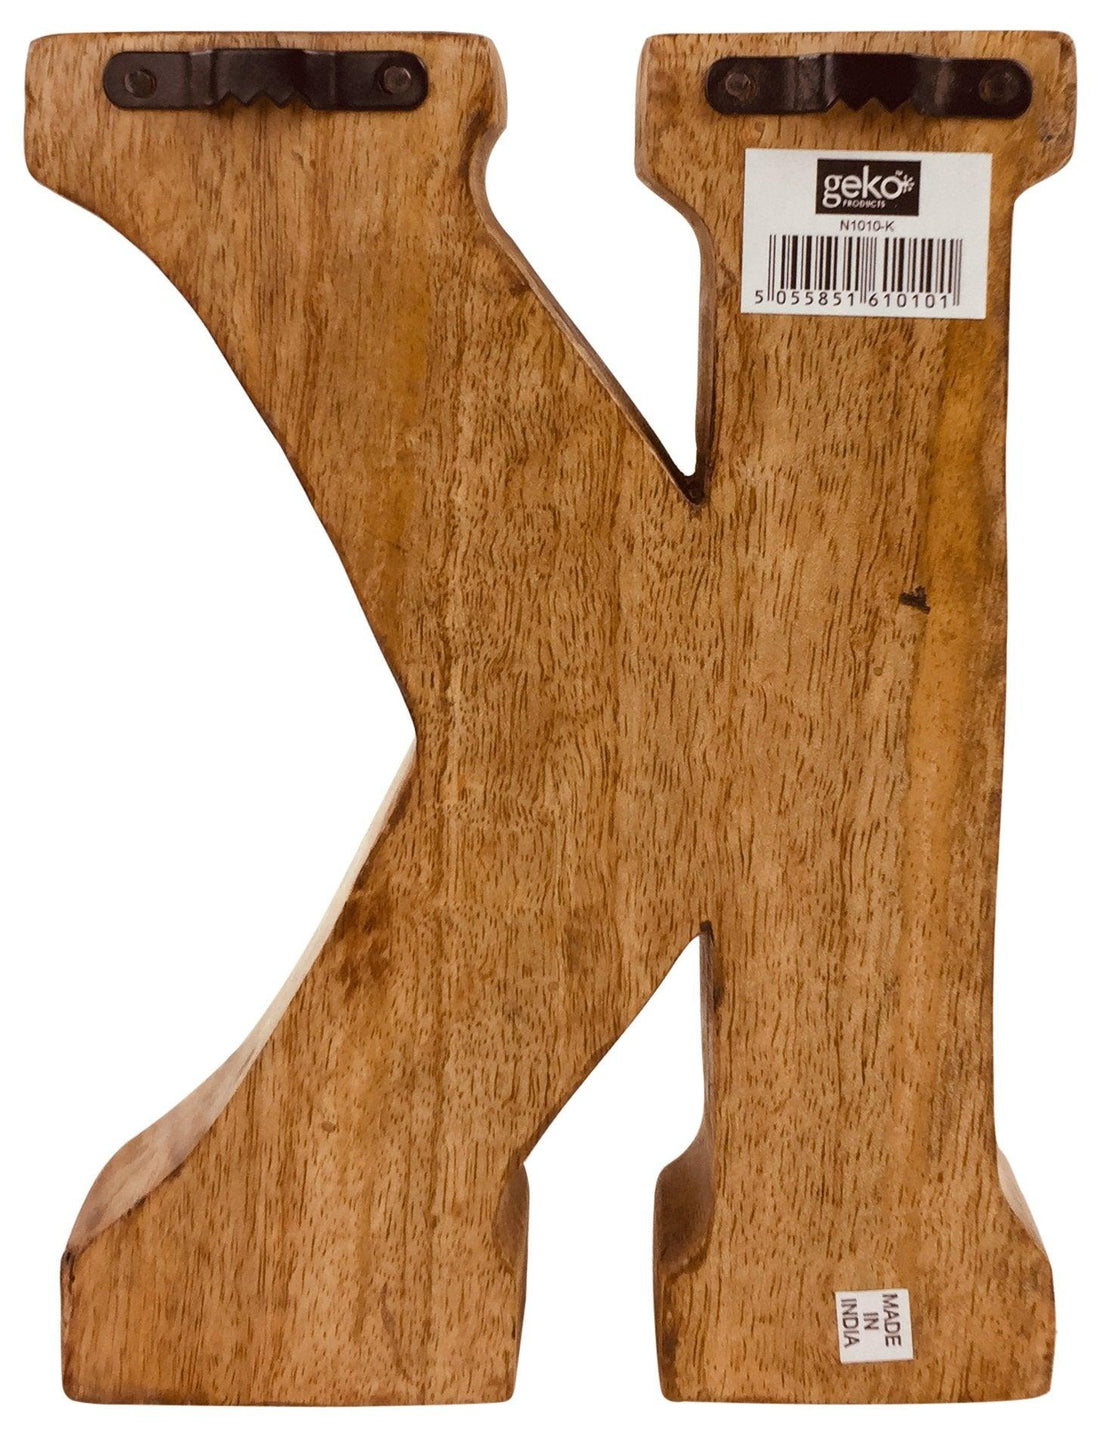 Hand Carved Wooden Geometric Letter K - £12.99 - Single Letters 